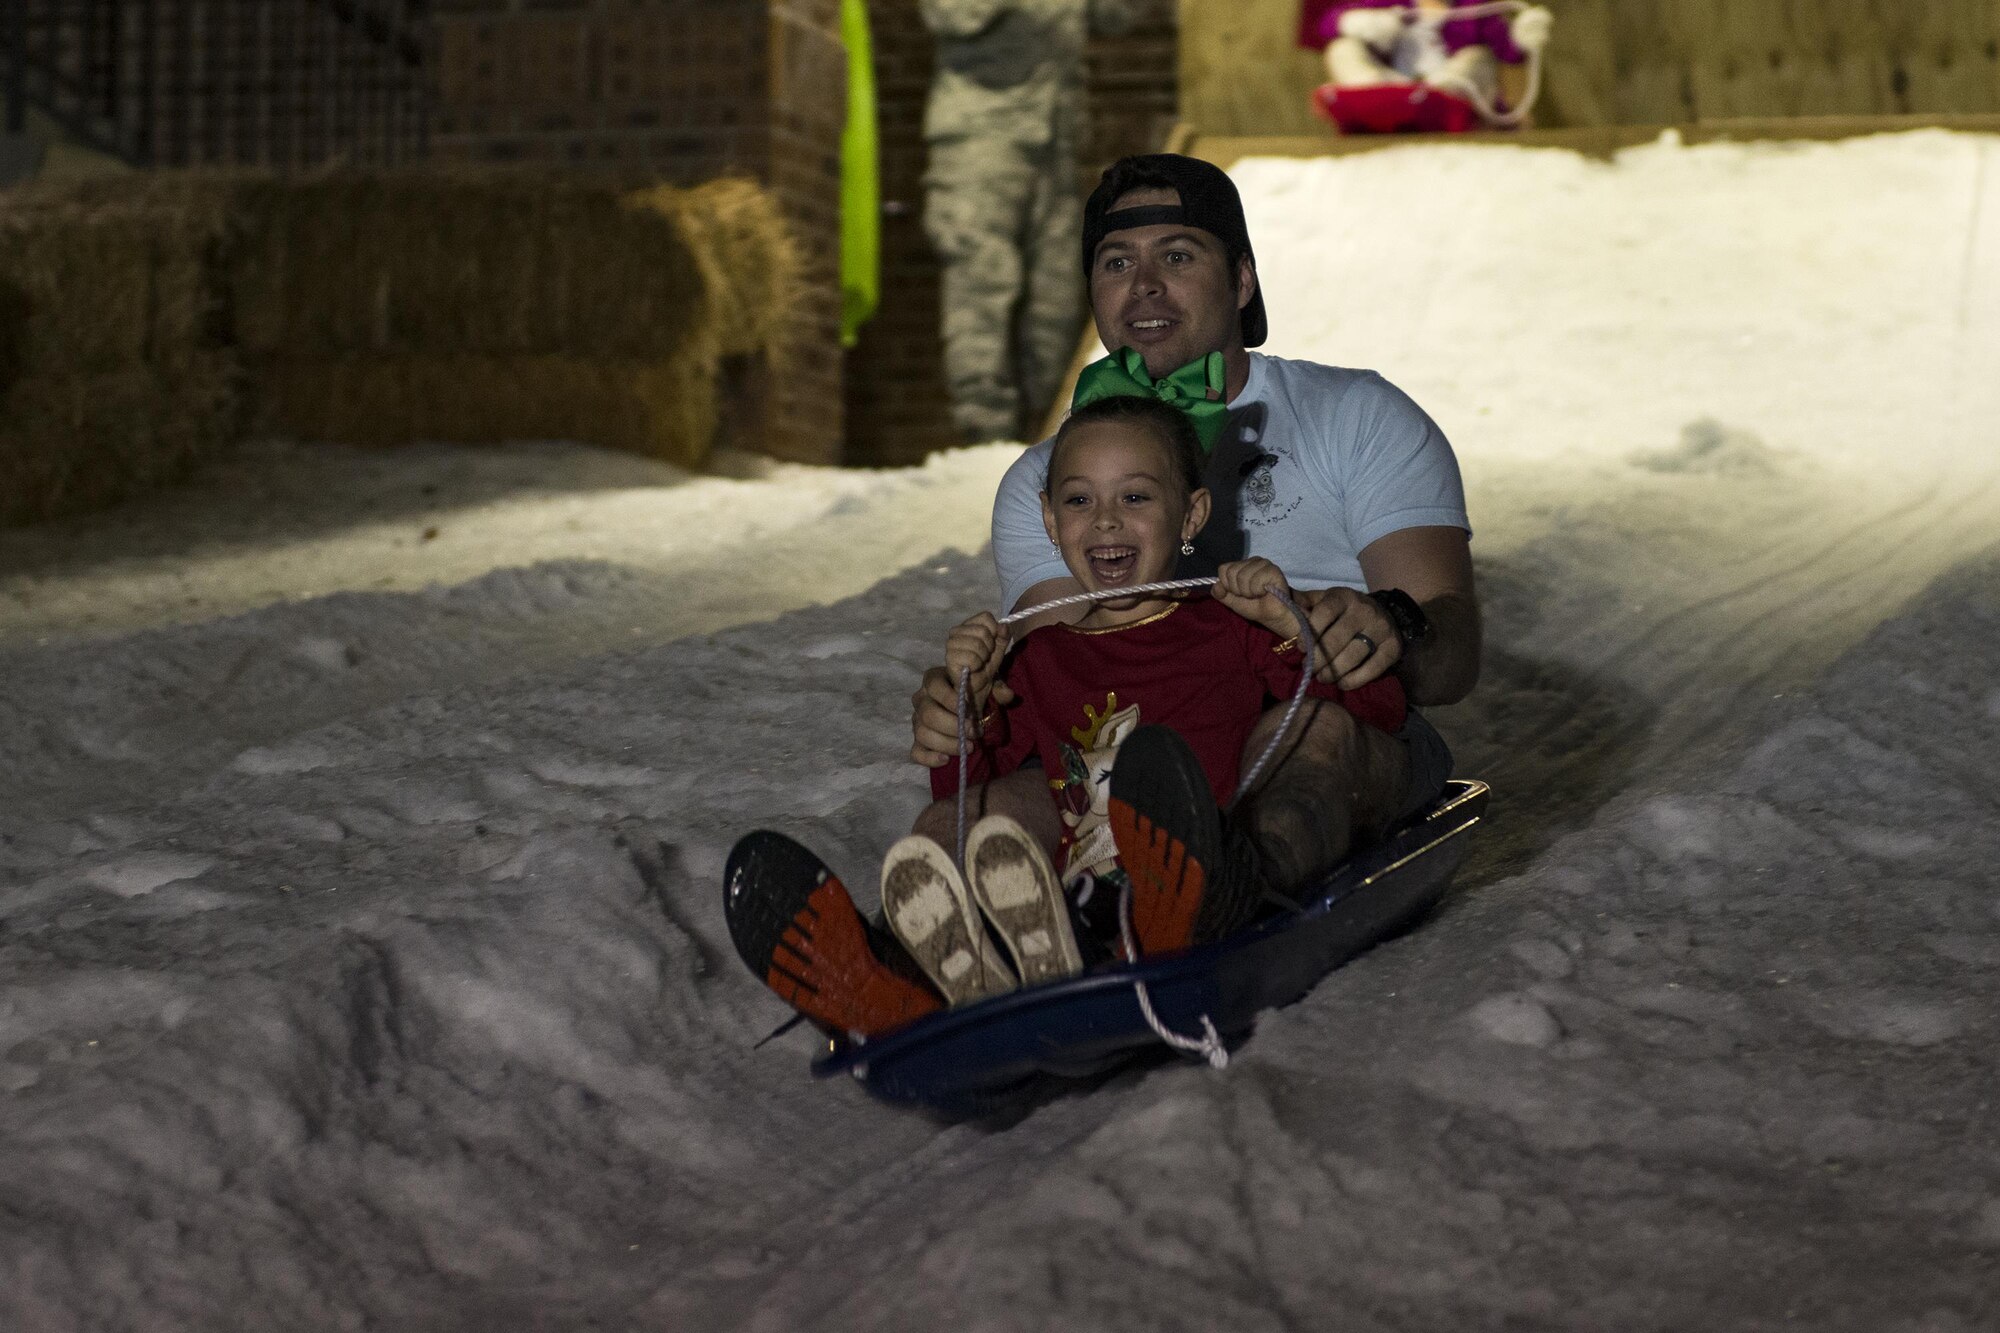 Attendees sled down a hill during the Tree Lighting Ceremony, Dec. 1, 2017, at Moody Air Force Base, Ga. The annual event brings the base community together as a way to show thanks for their continuous sacrifice and celebrate the holiday season. The celebration included a parade, raffle give-a-ways, children’s activities and traditional lighting of the base Christmas tree by families of deployed Airmen. (U.S. Air Force photo by Airman 1st Class Erick Requadt)